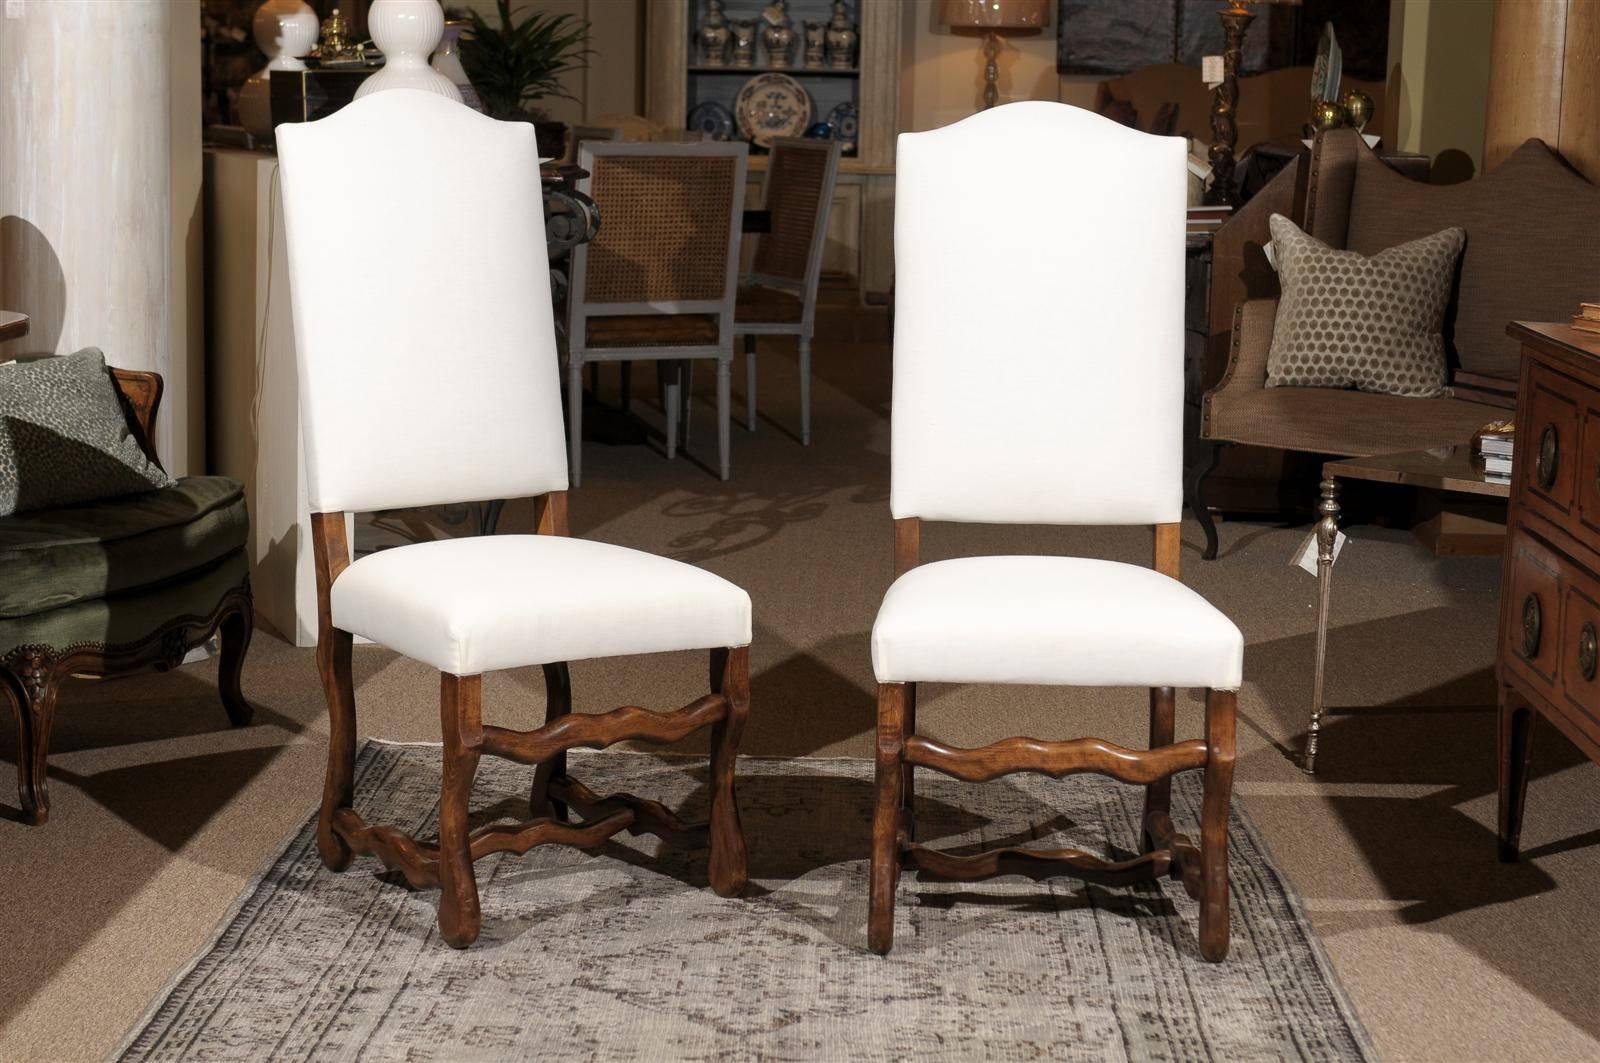 Set of Eight Vintage Louis XIII Style Beech Dining Chairs, circa 1950
This is an excellent set of the Louis XIII style chair. The frame and the legs are beech. The patina is very pretty and the chair is comfortable and ready to use. The set has